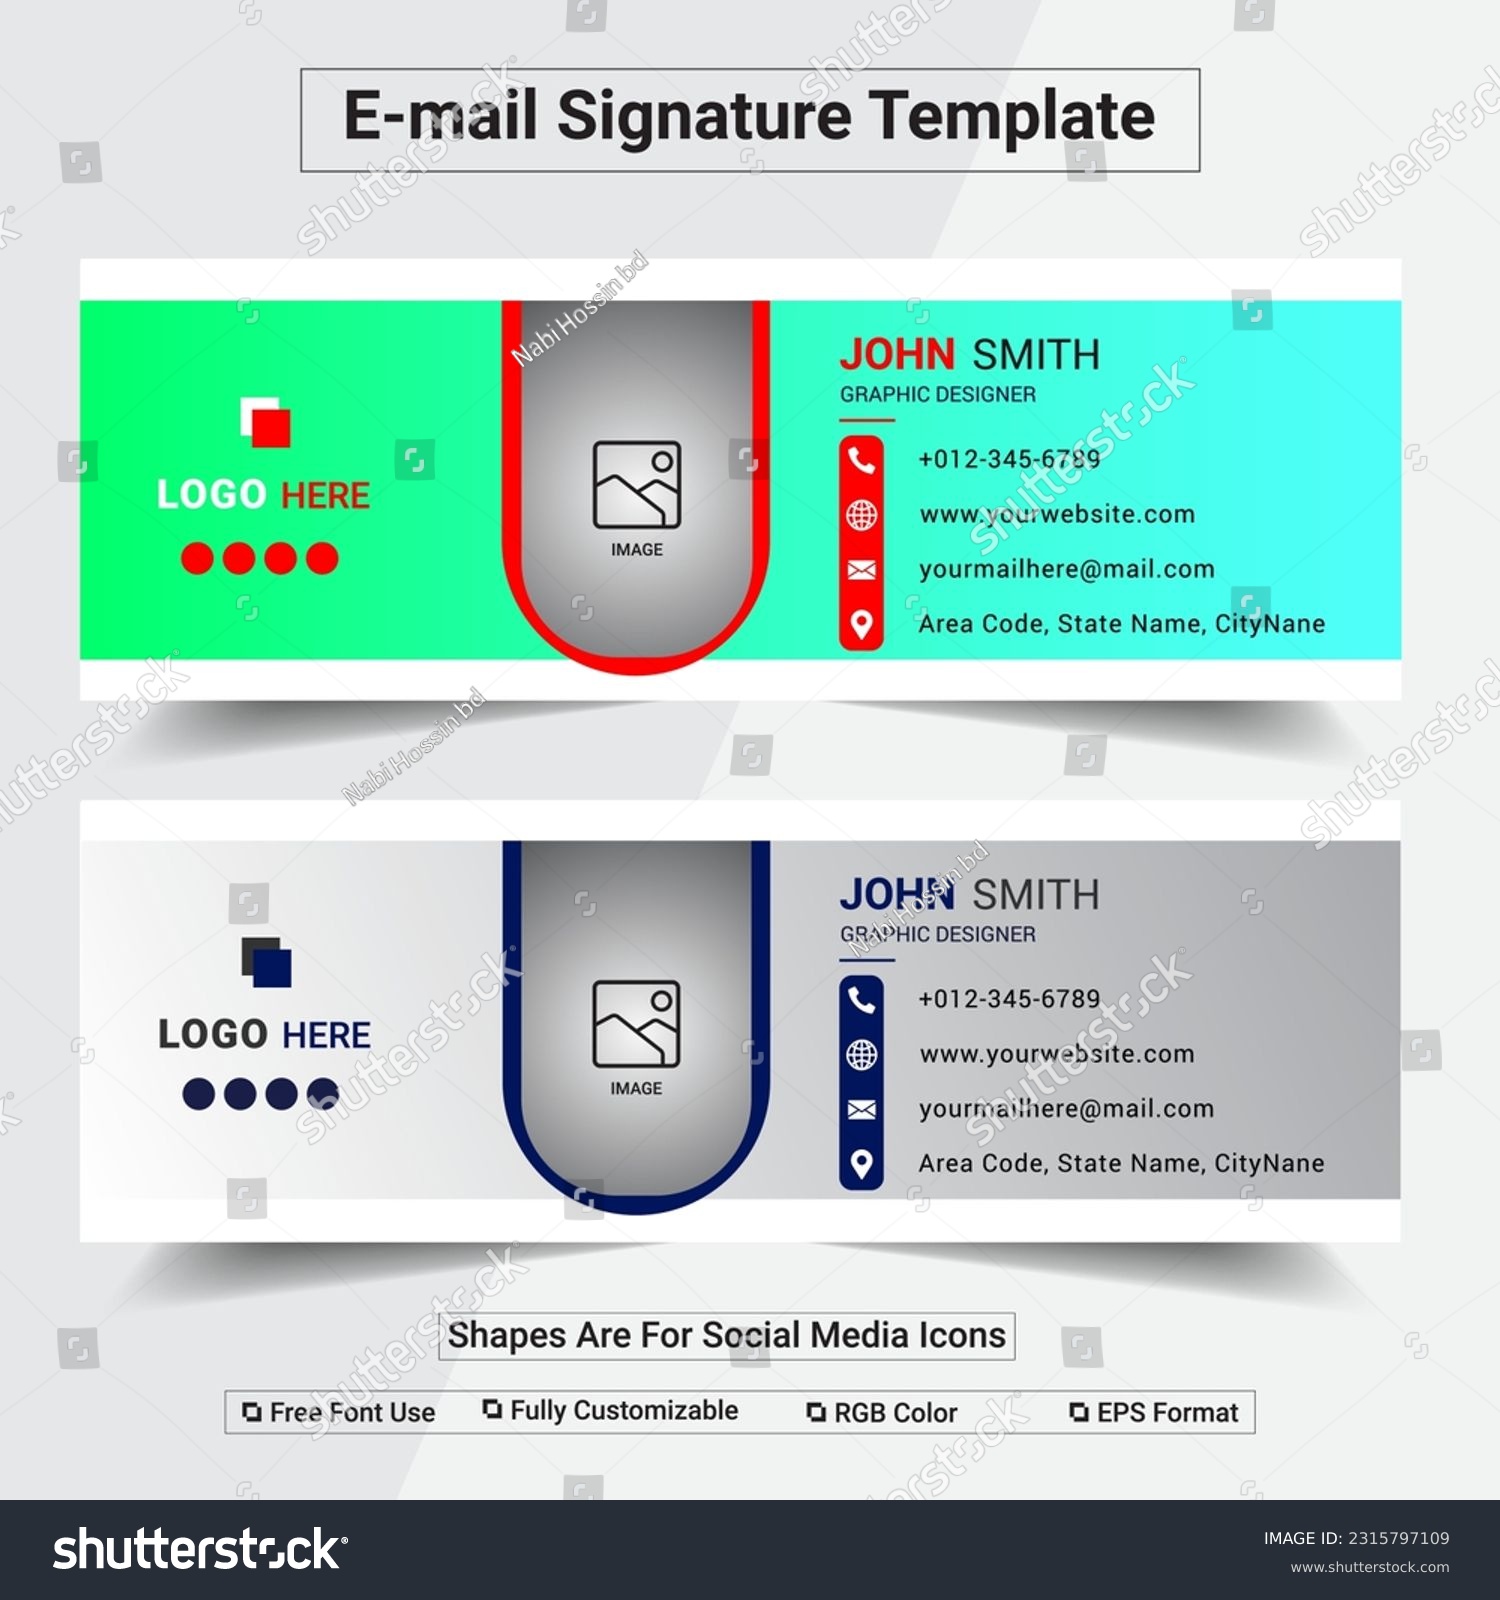 SVG of E-mail Signature Design Template.
creative email, custom email,  svg